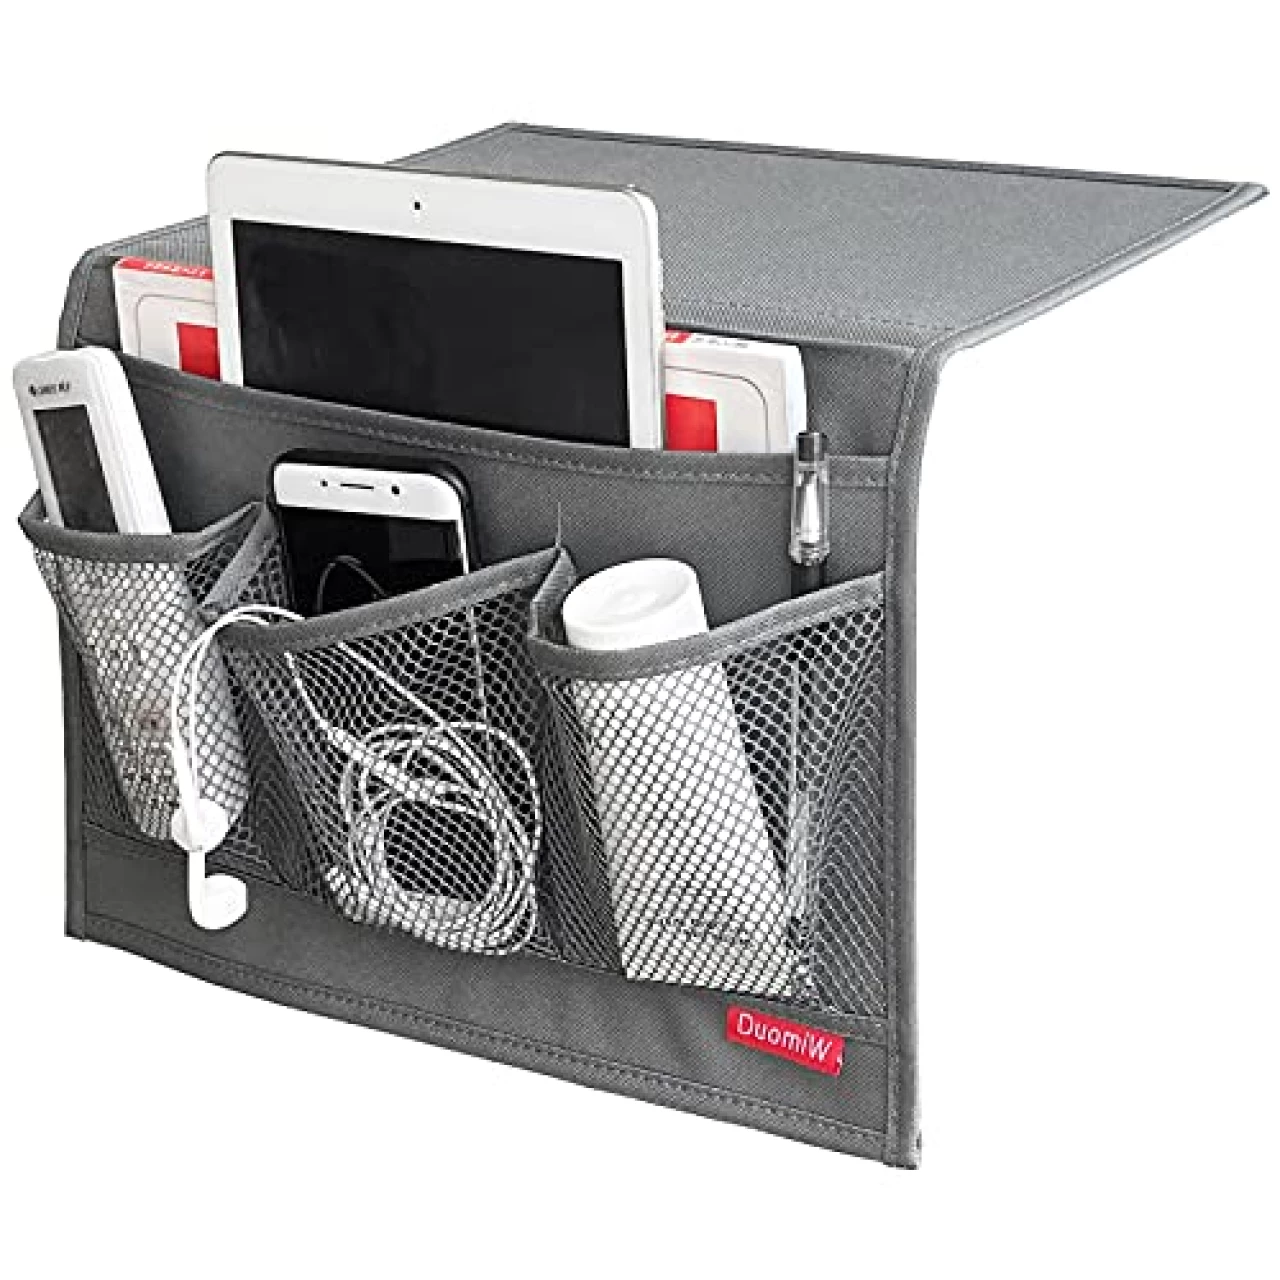 DuomiW Bedside Storage Organizer, Caddy, Table Cabinet , TV Remote Control, Phones, Magazines, Tablets, Accessories (Grey)